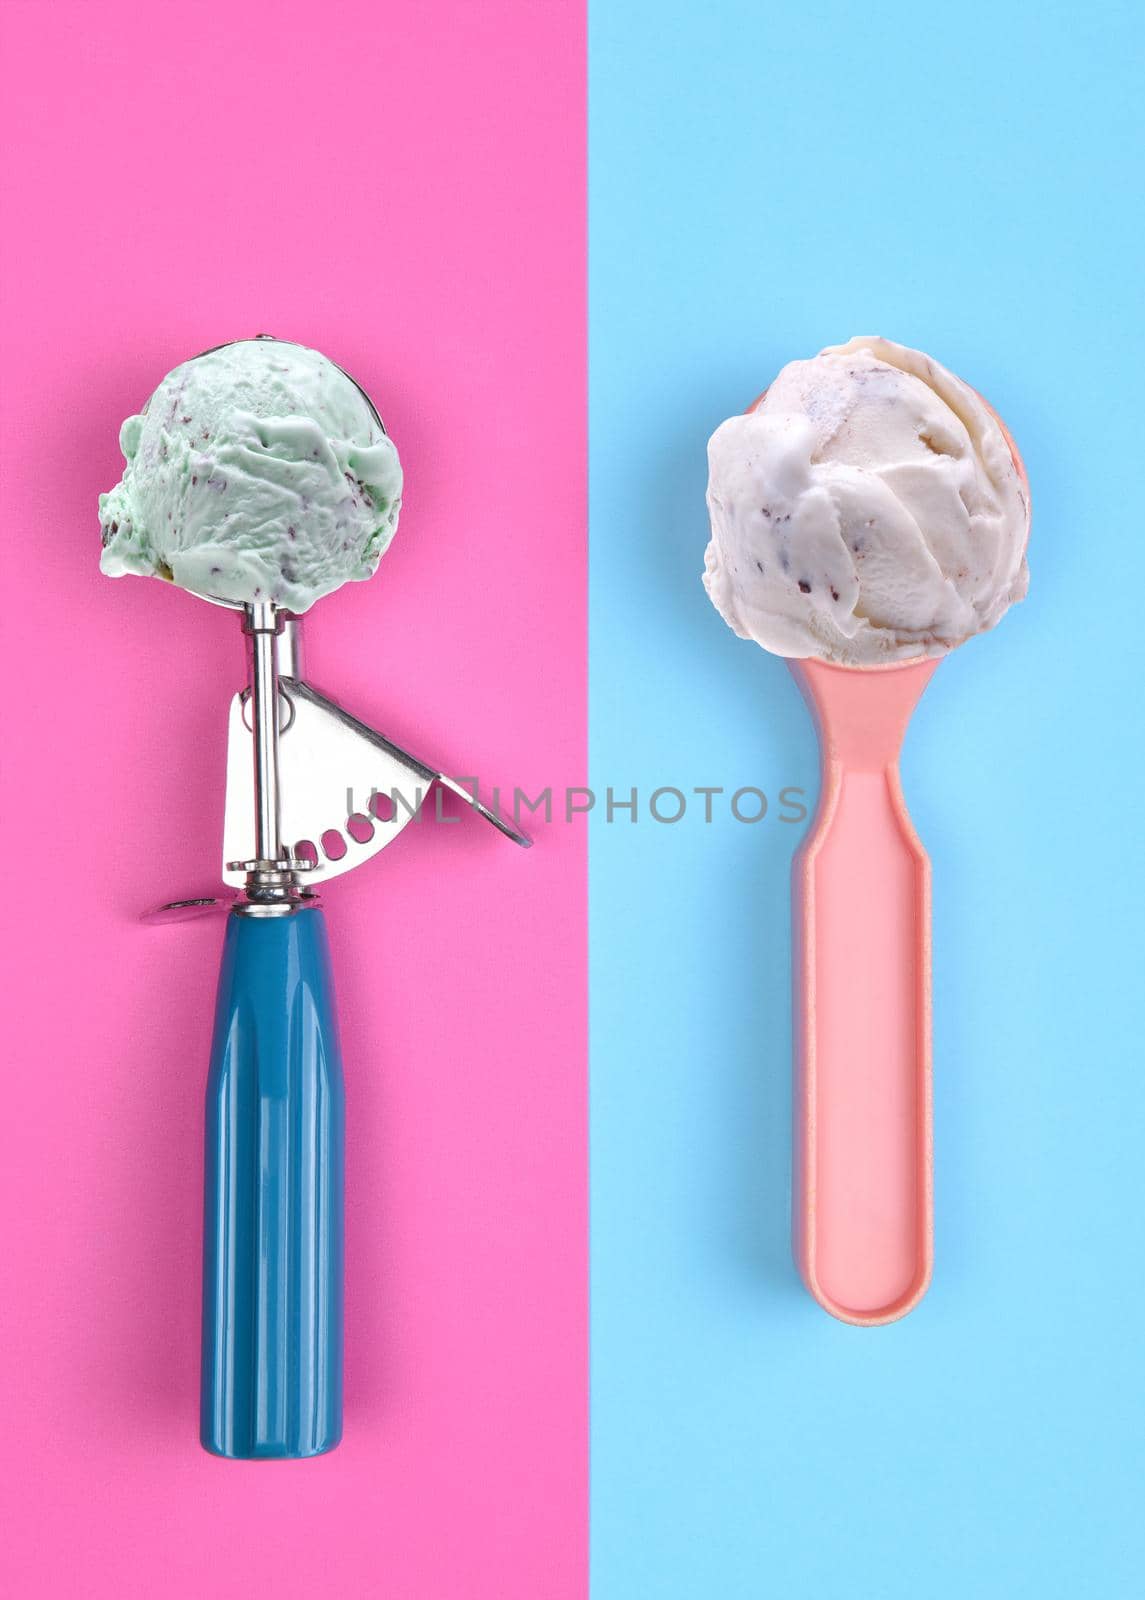 Mint Chip and Vanilla Chocolate Chip Ice Cream Scoops high angle flat lay on pink and blue background.